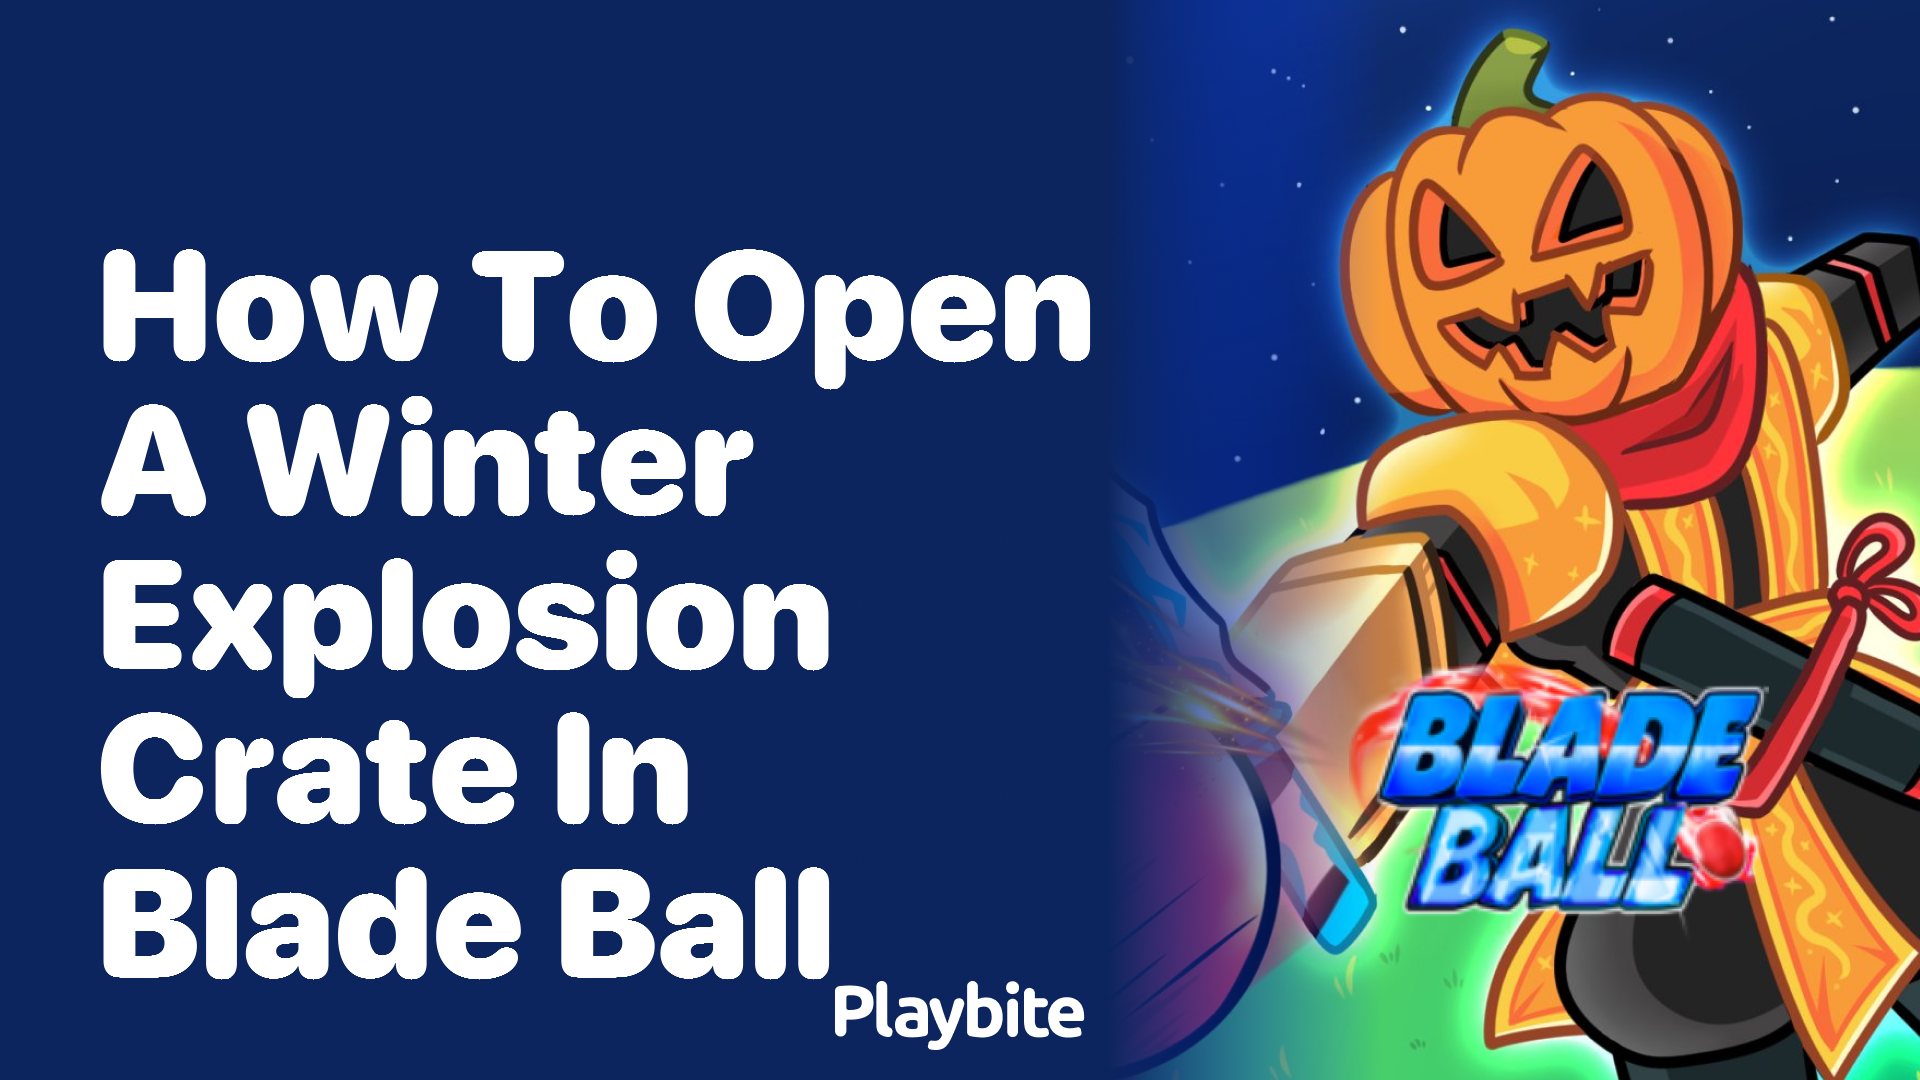 How to Open a Winter Explosion Crate in Blade Ball